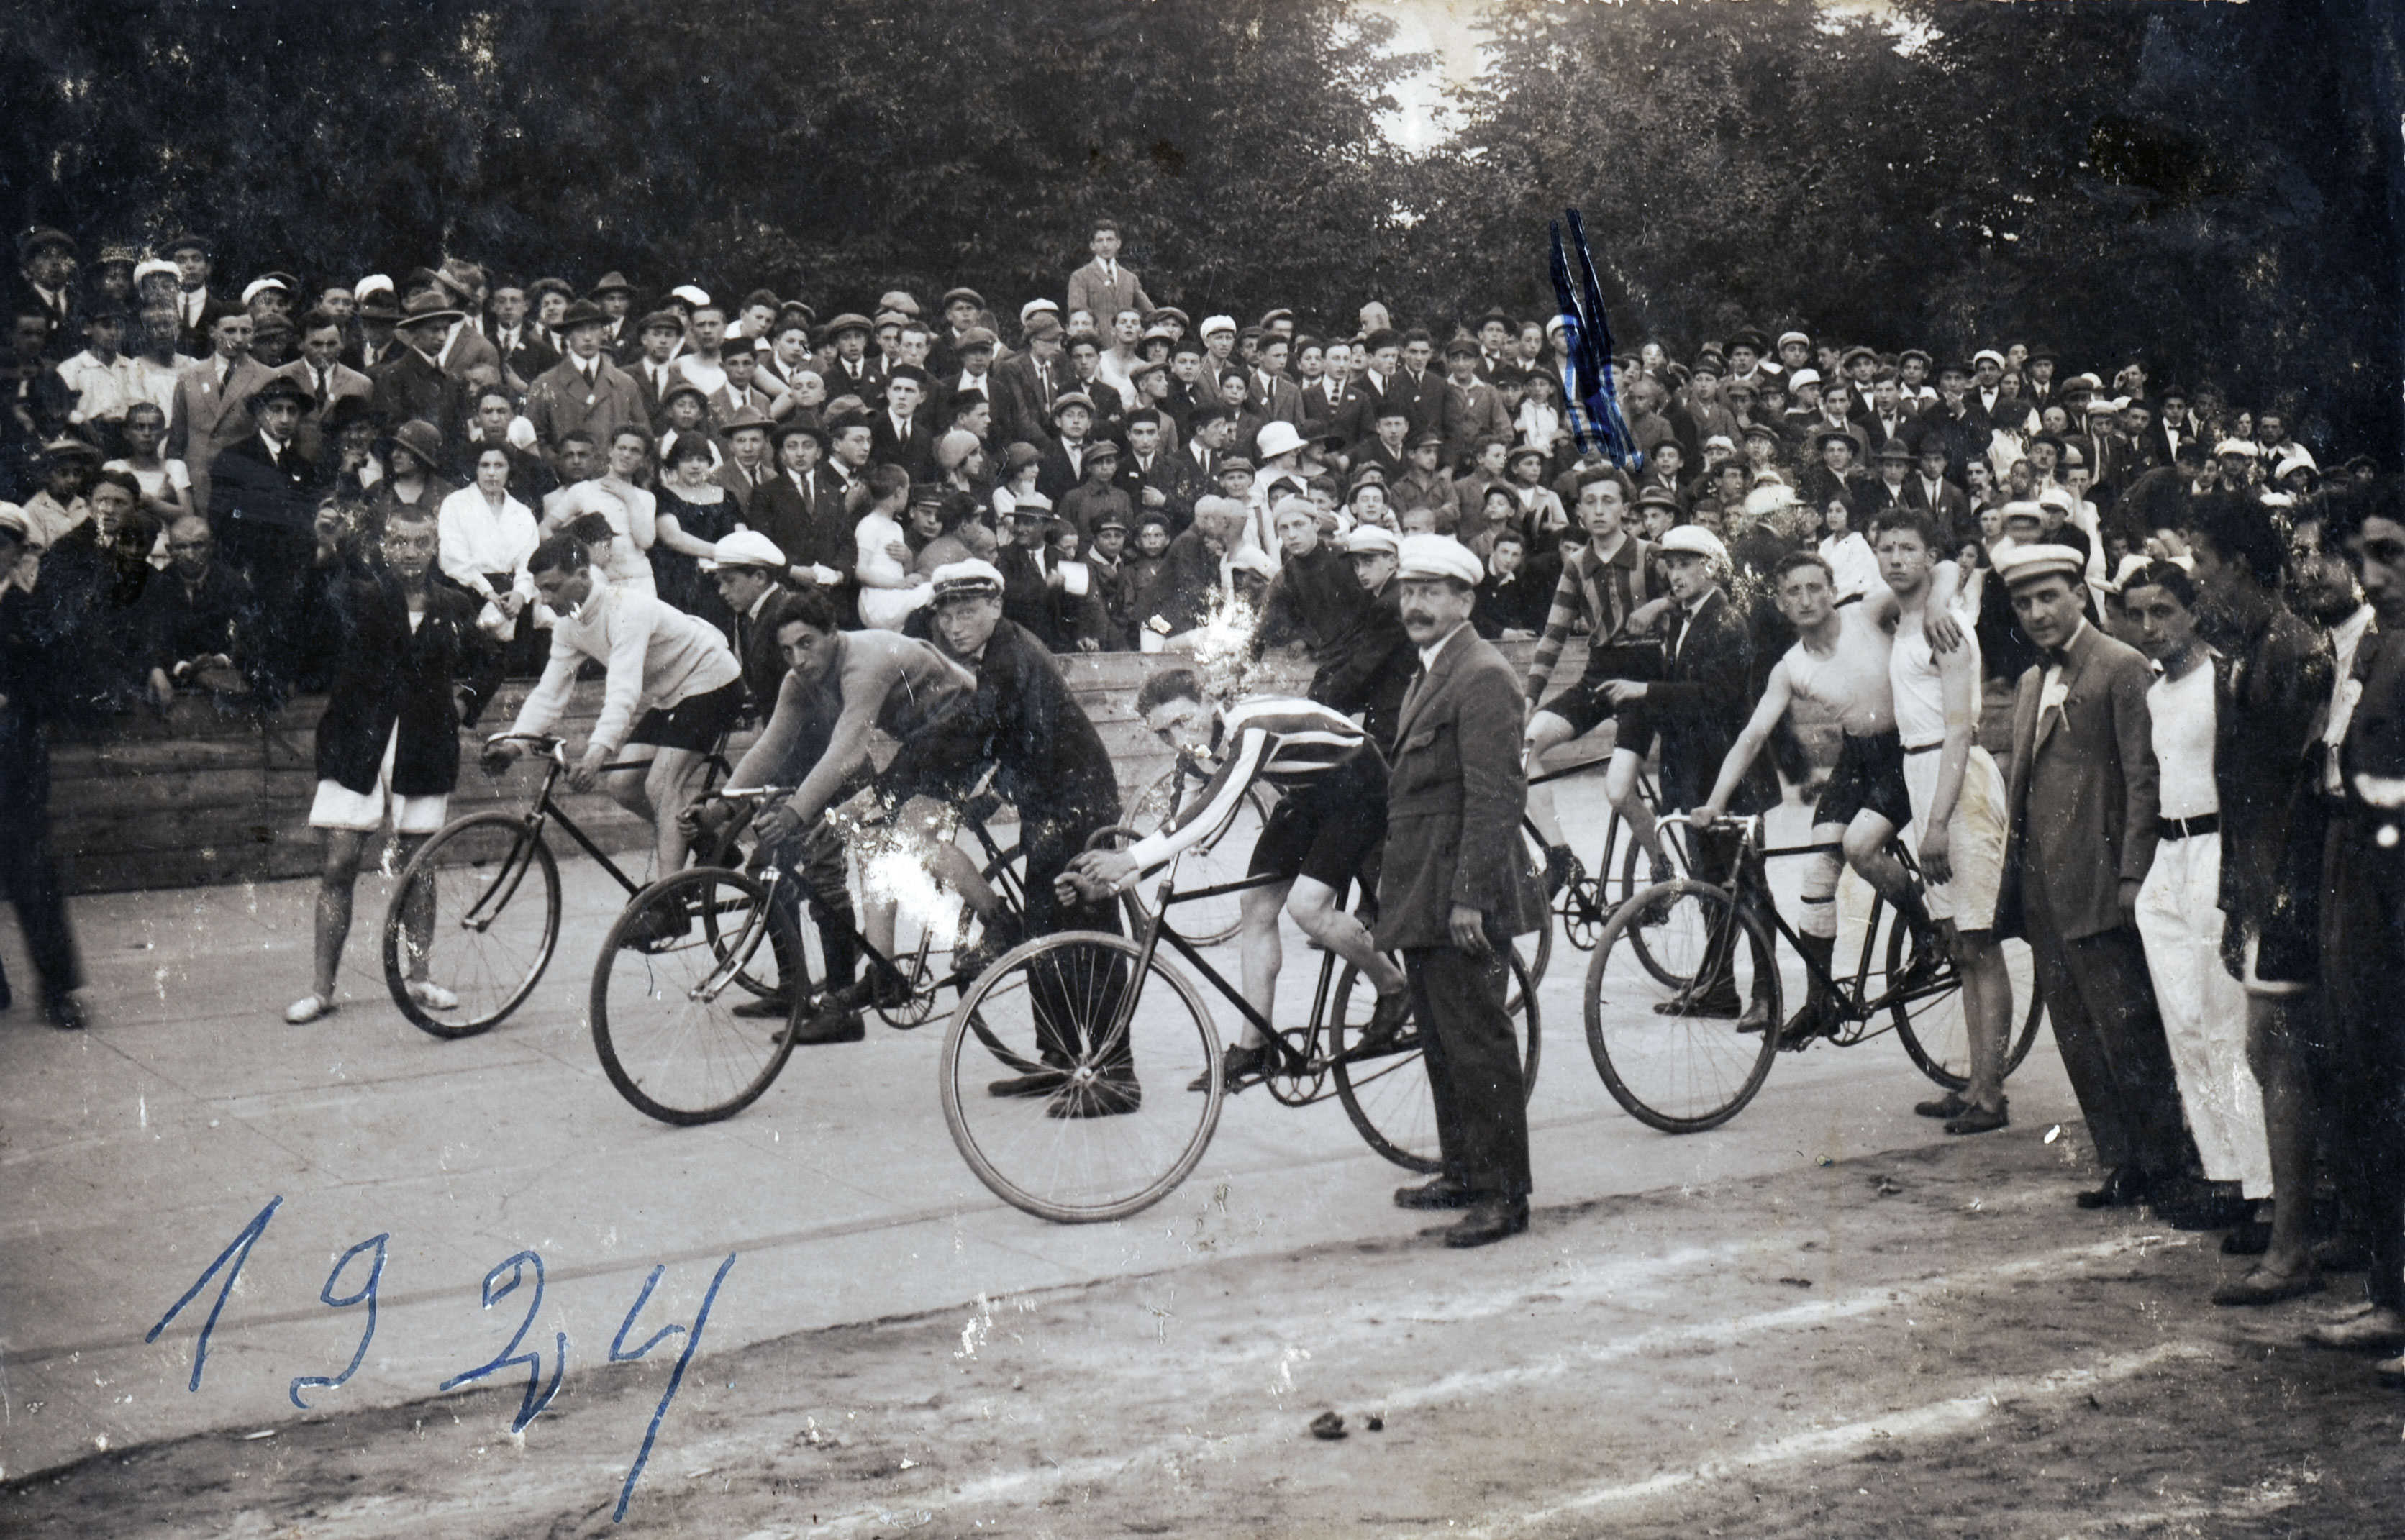 Moshe Cukierman (marked in blue) and fellow riders from the Bar Kochba sports club at the starting line of a race, Lodz, 1924